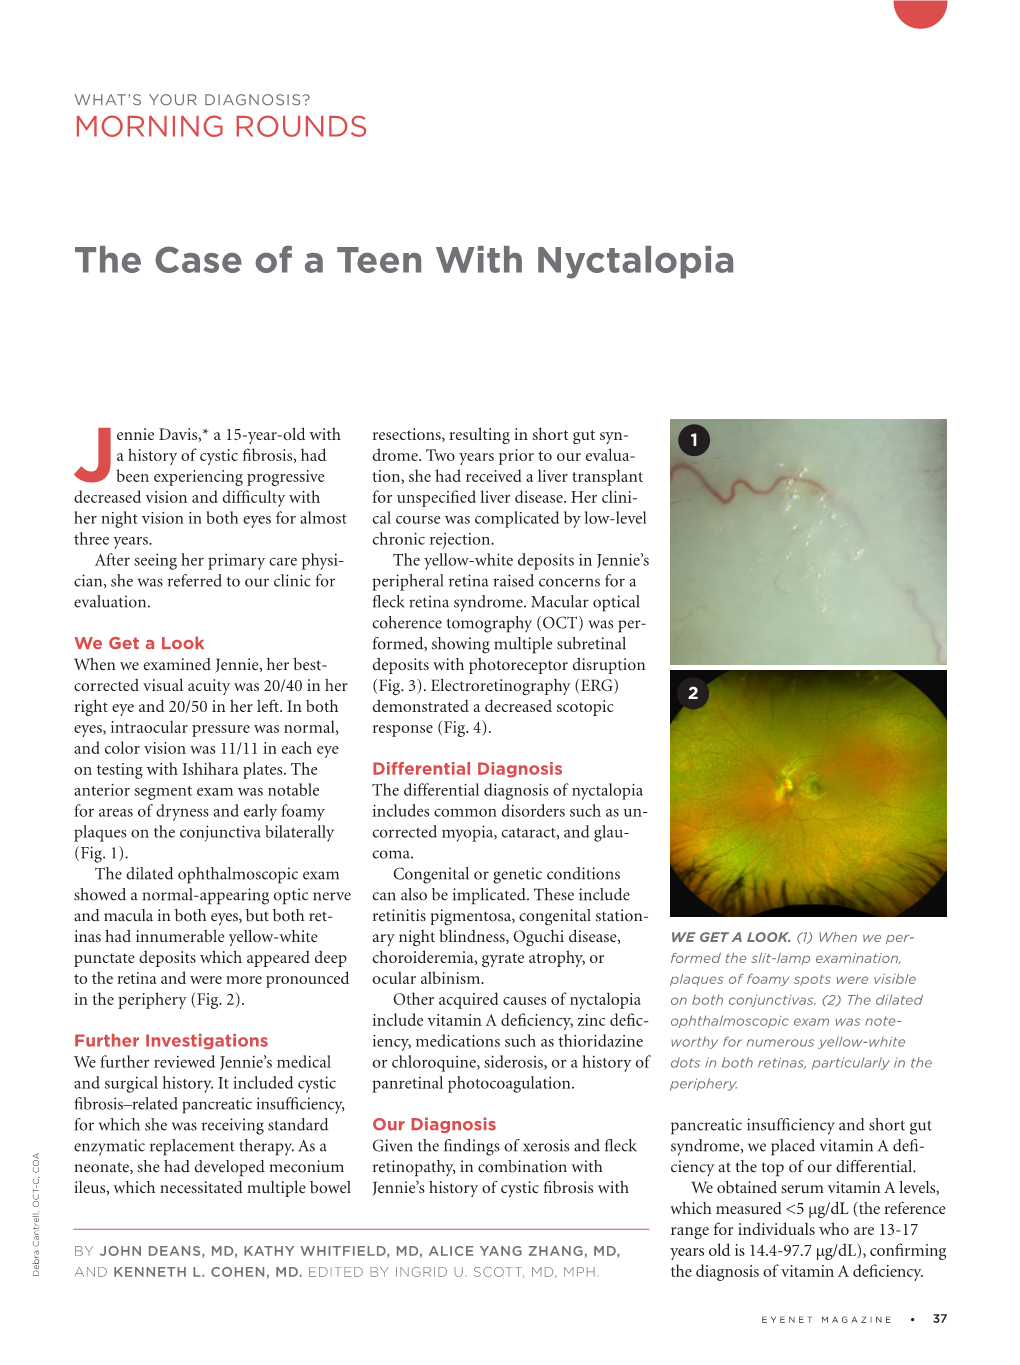 The Case of a Teen with Nyctalopia